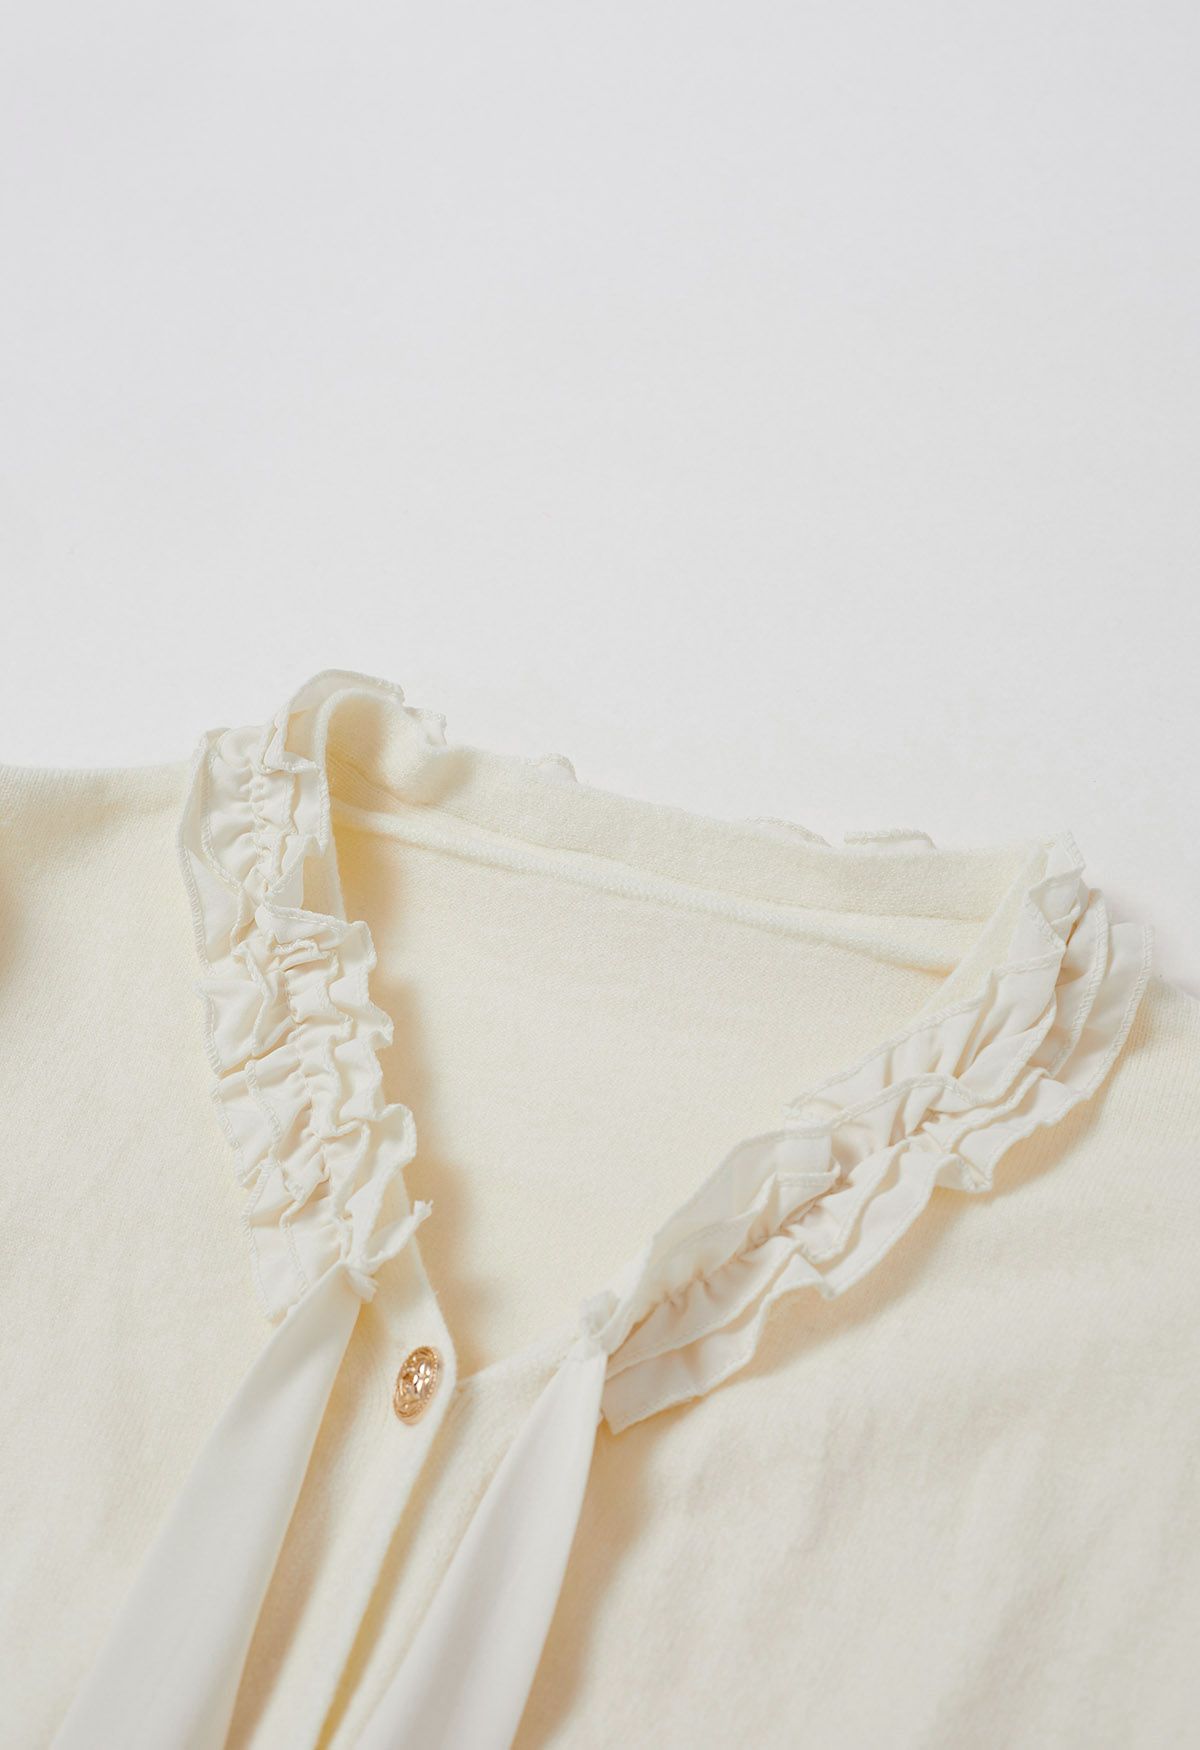 Ruffle Tie-Bow Wool-Blend Buttoned Top in Cream